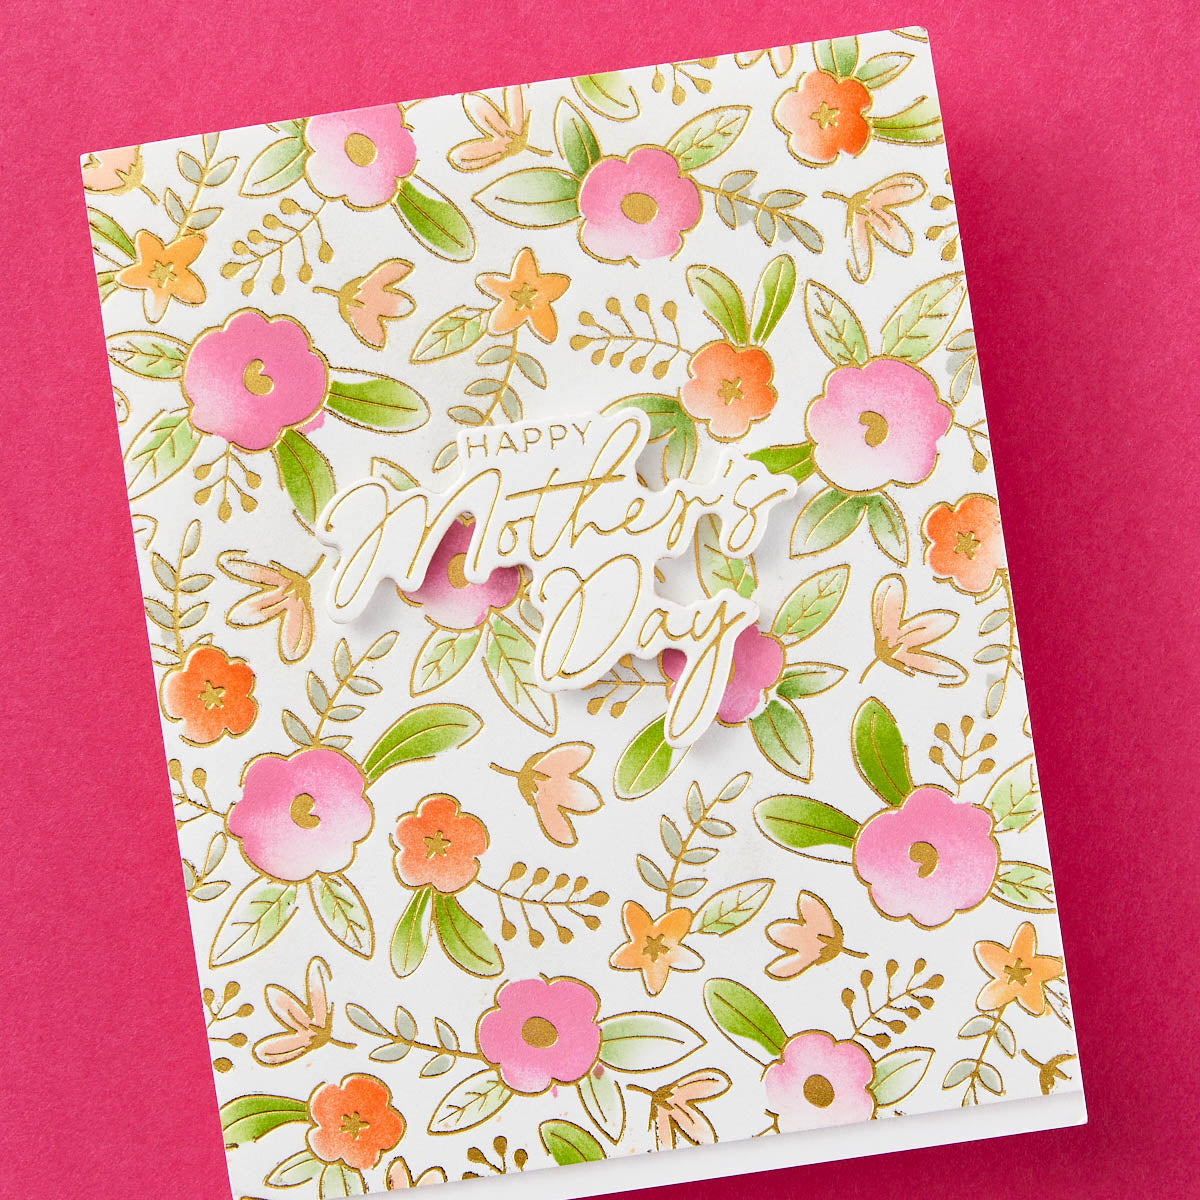 Spellbinders - Floral Celebration Press Plate and Stencil Bundle from the Let's Celebrate Collection by Yana Smakula